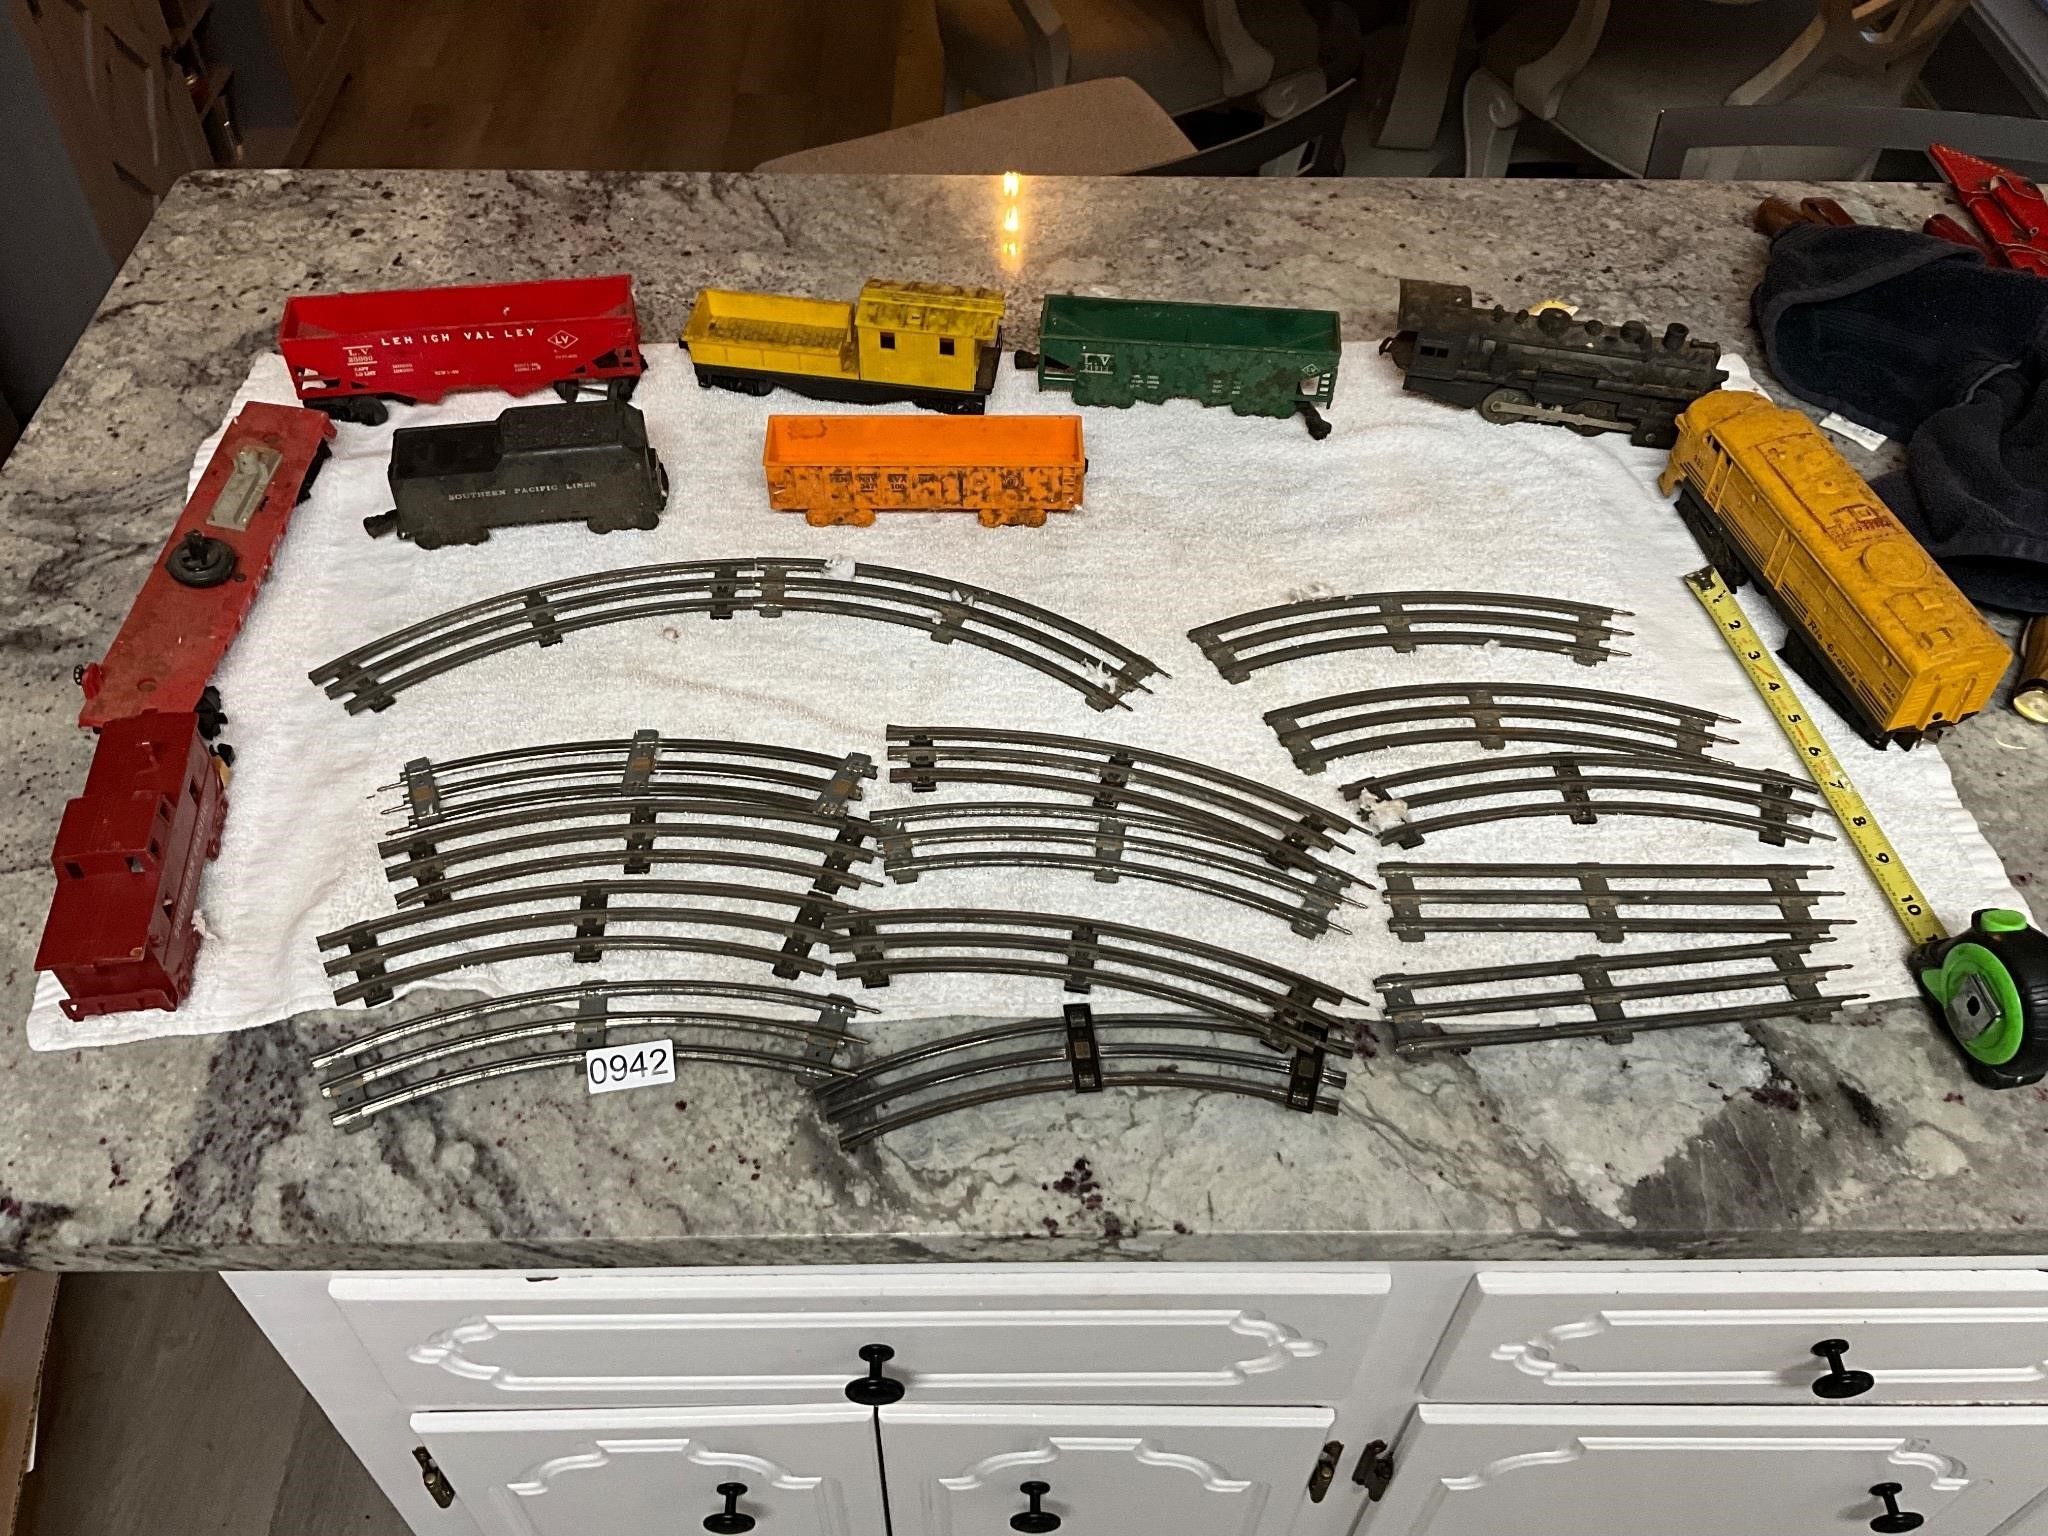 Train engines, cars, track- one made by Lionel